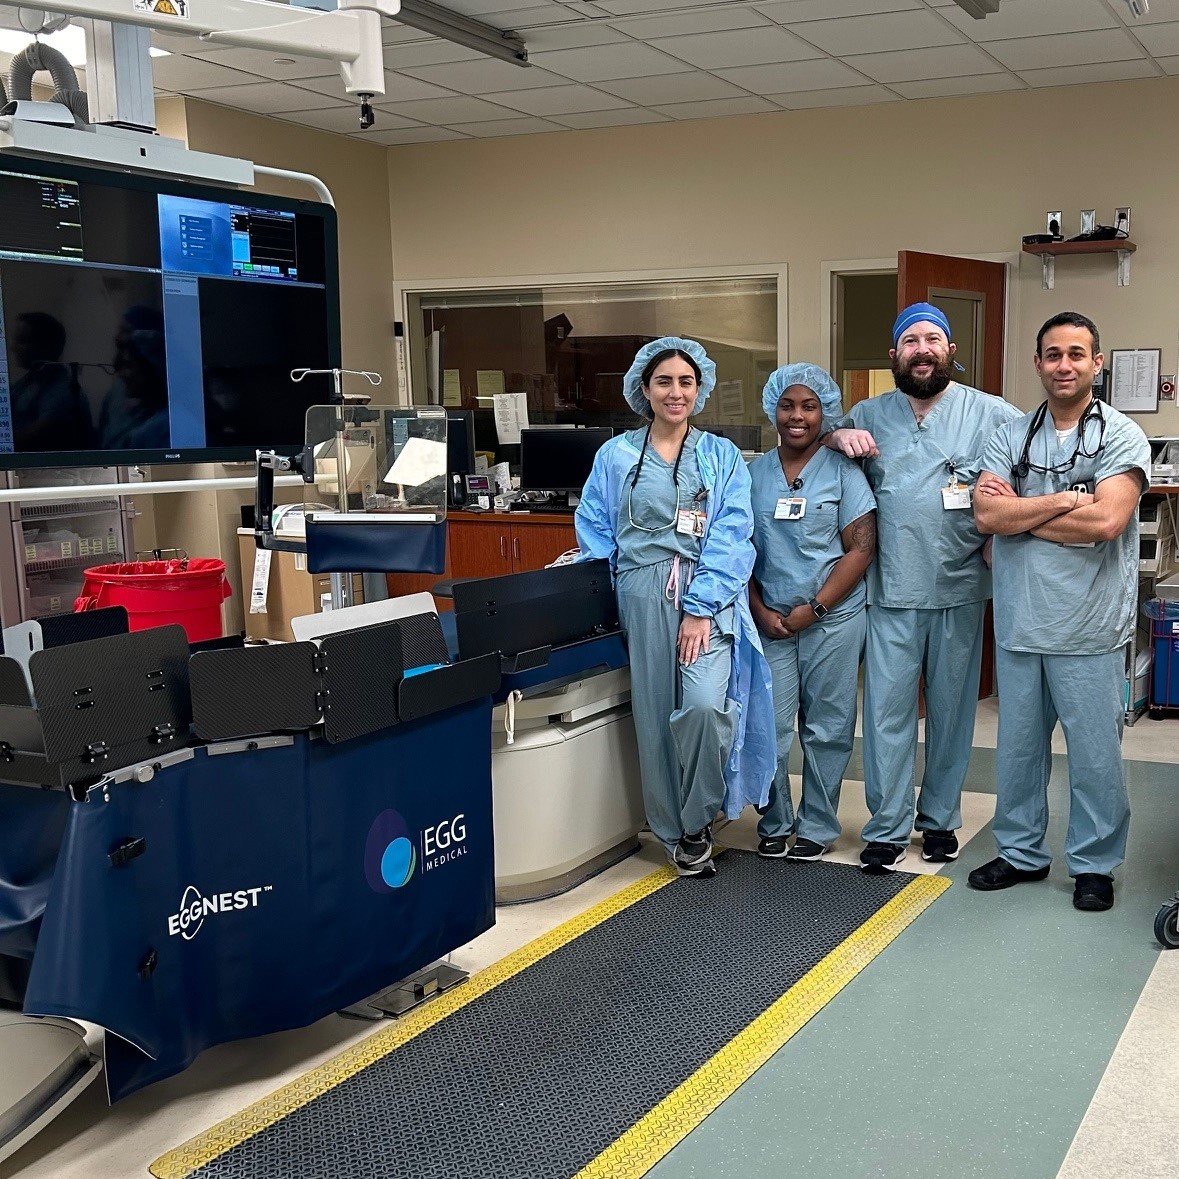 @ElmhurstHealth in Oak Brook, IL understands that #ScatterMatters. Last week we were honored to install 2 new #EggNest Radiation Protection Systems in their Cath Lab, reducing their radiation exposure by up to 97% for everyone in every case without impacting workflow!…